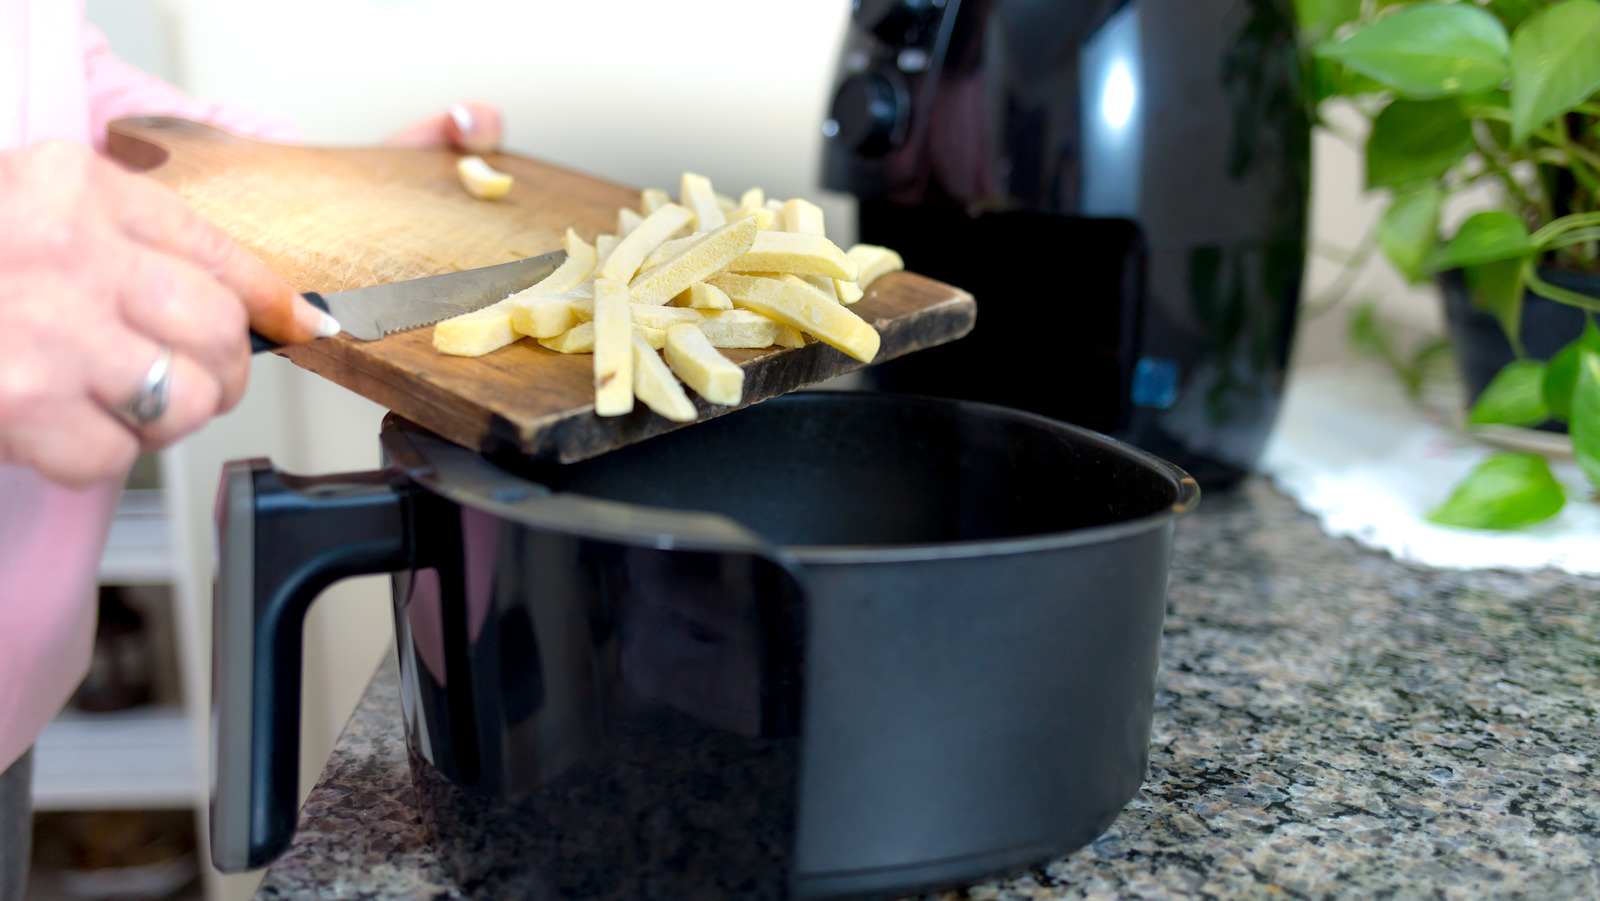 Use this air fryer accessory to double your air fryer's space